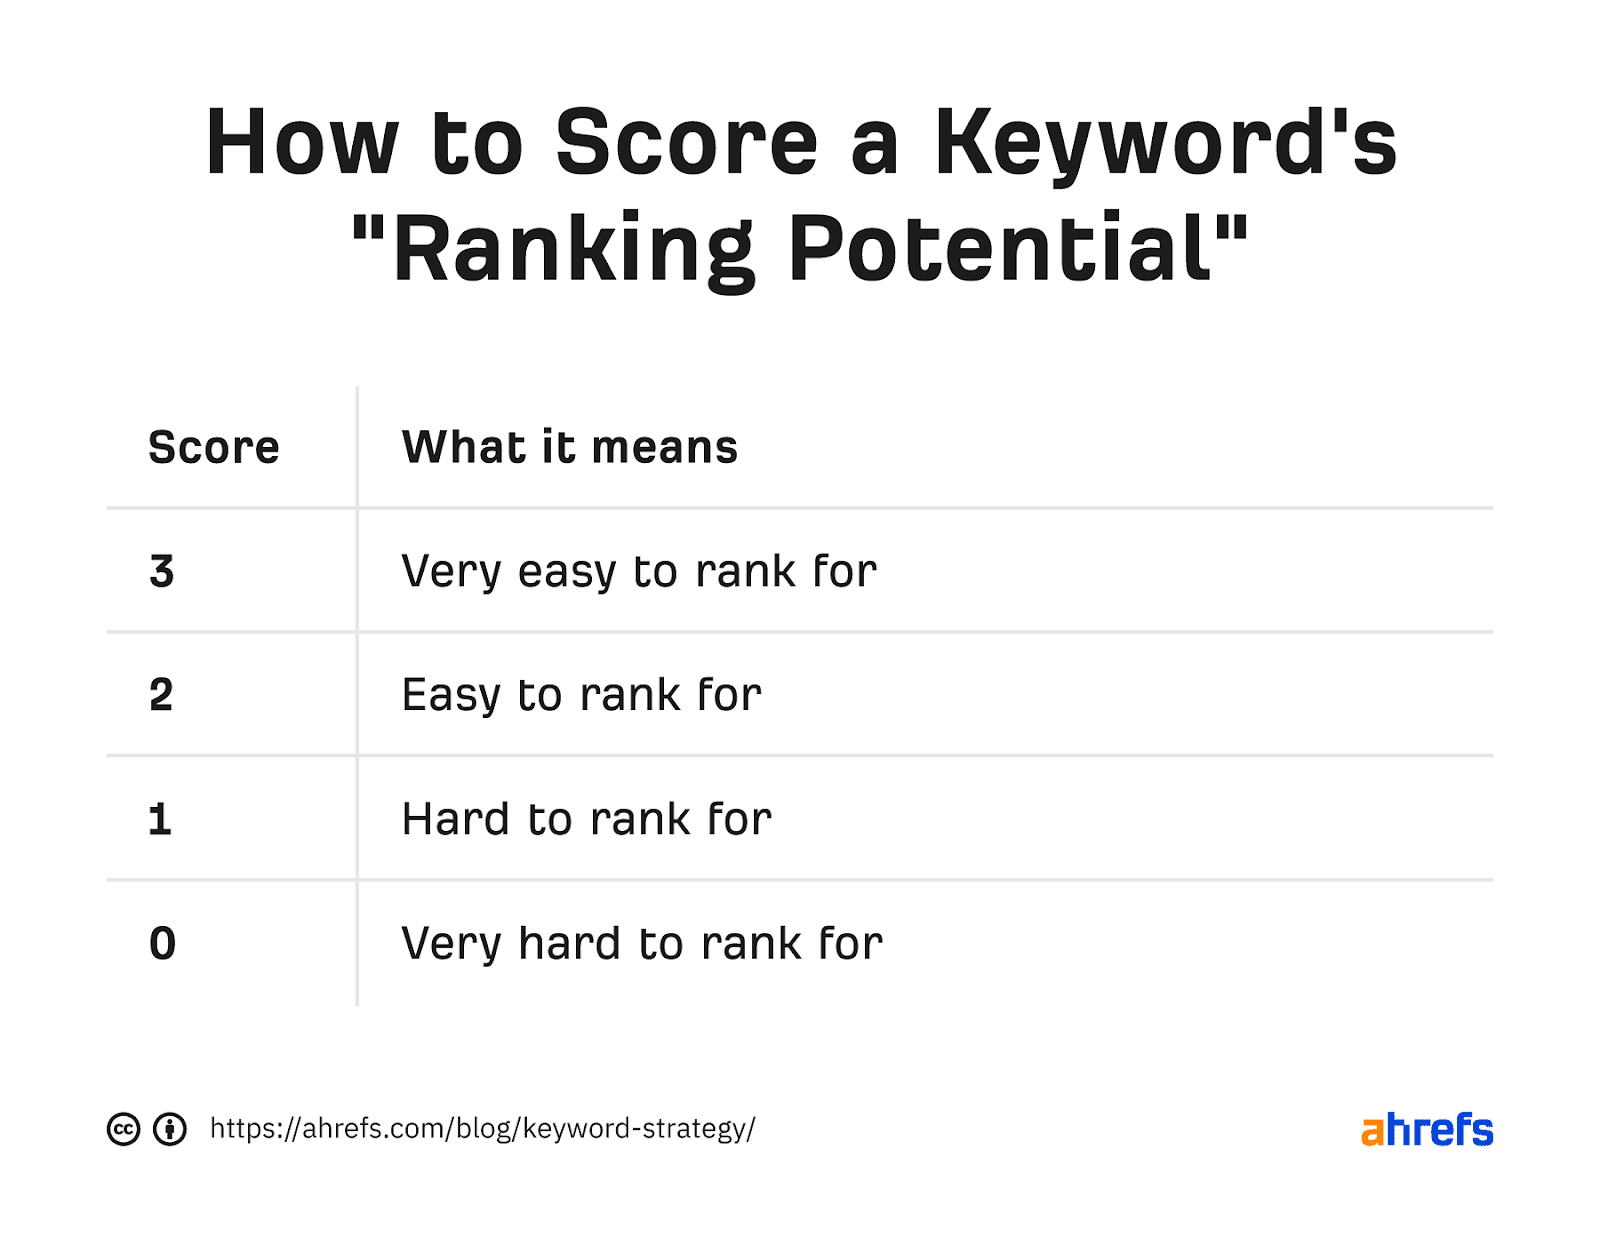 How to score a keyword's ranking potential